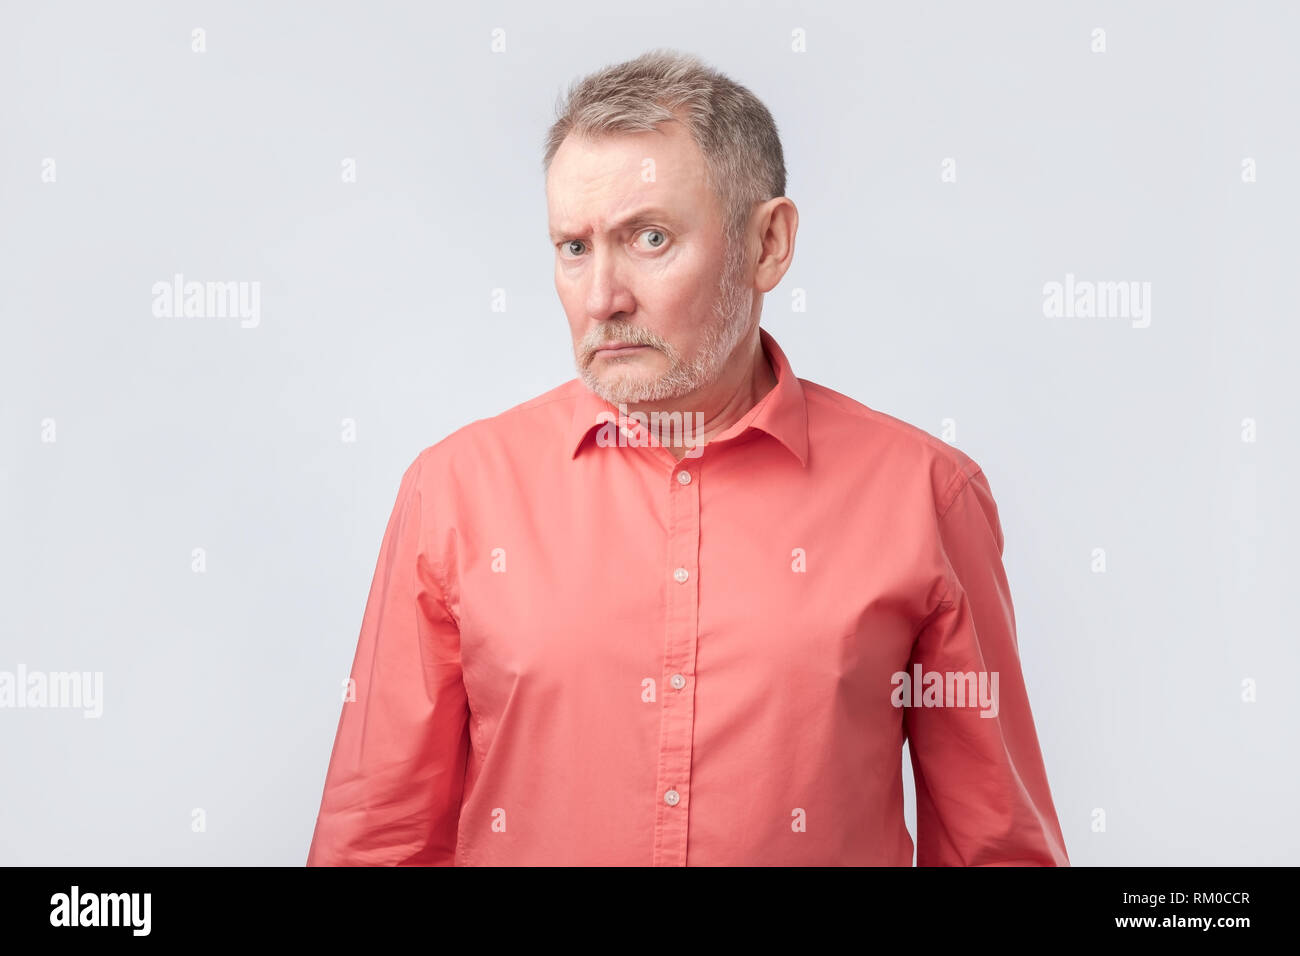 Senior man in red shirt frowning and squinting, showing disbelief or doubt Stock Photo